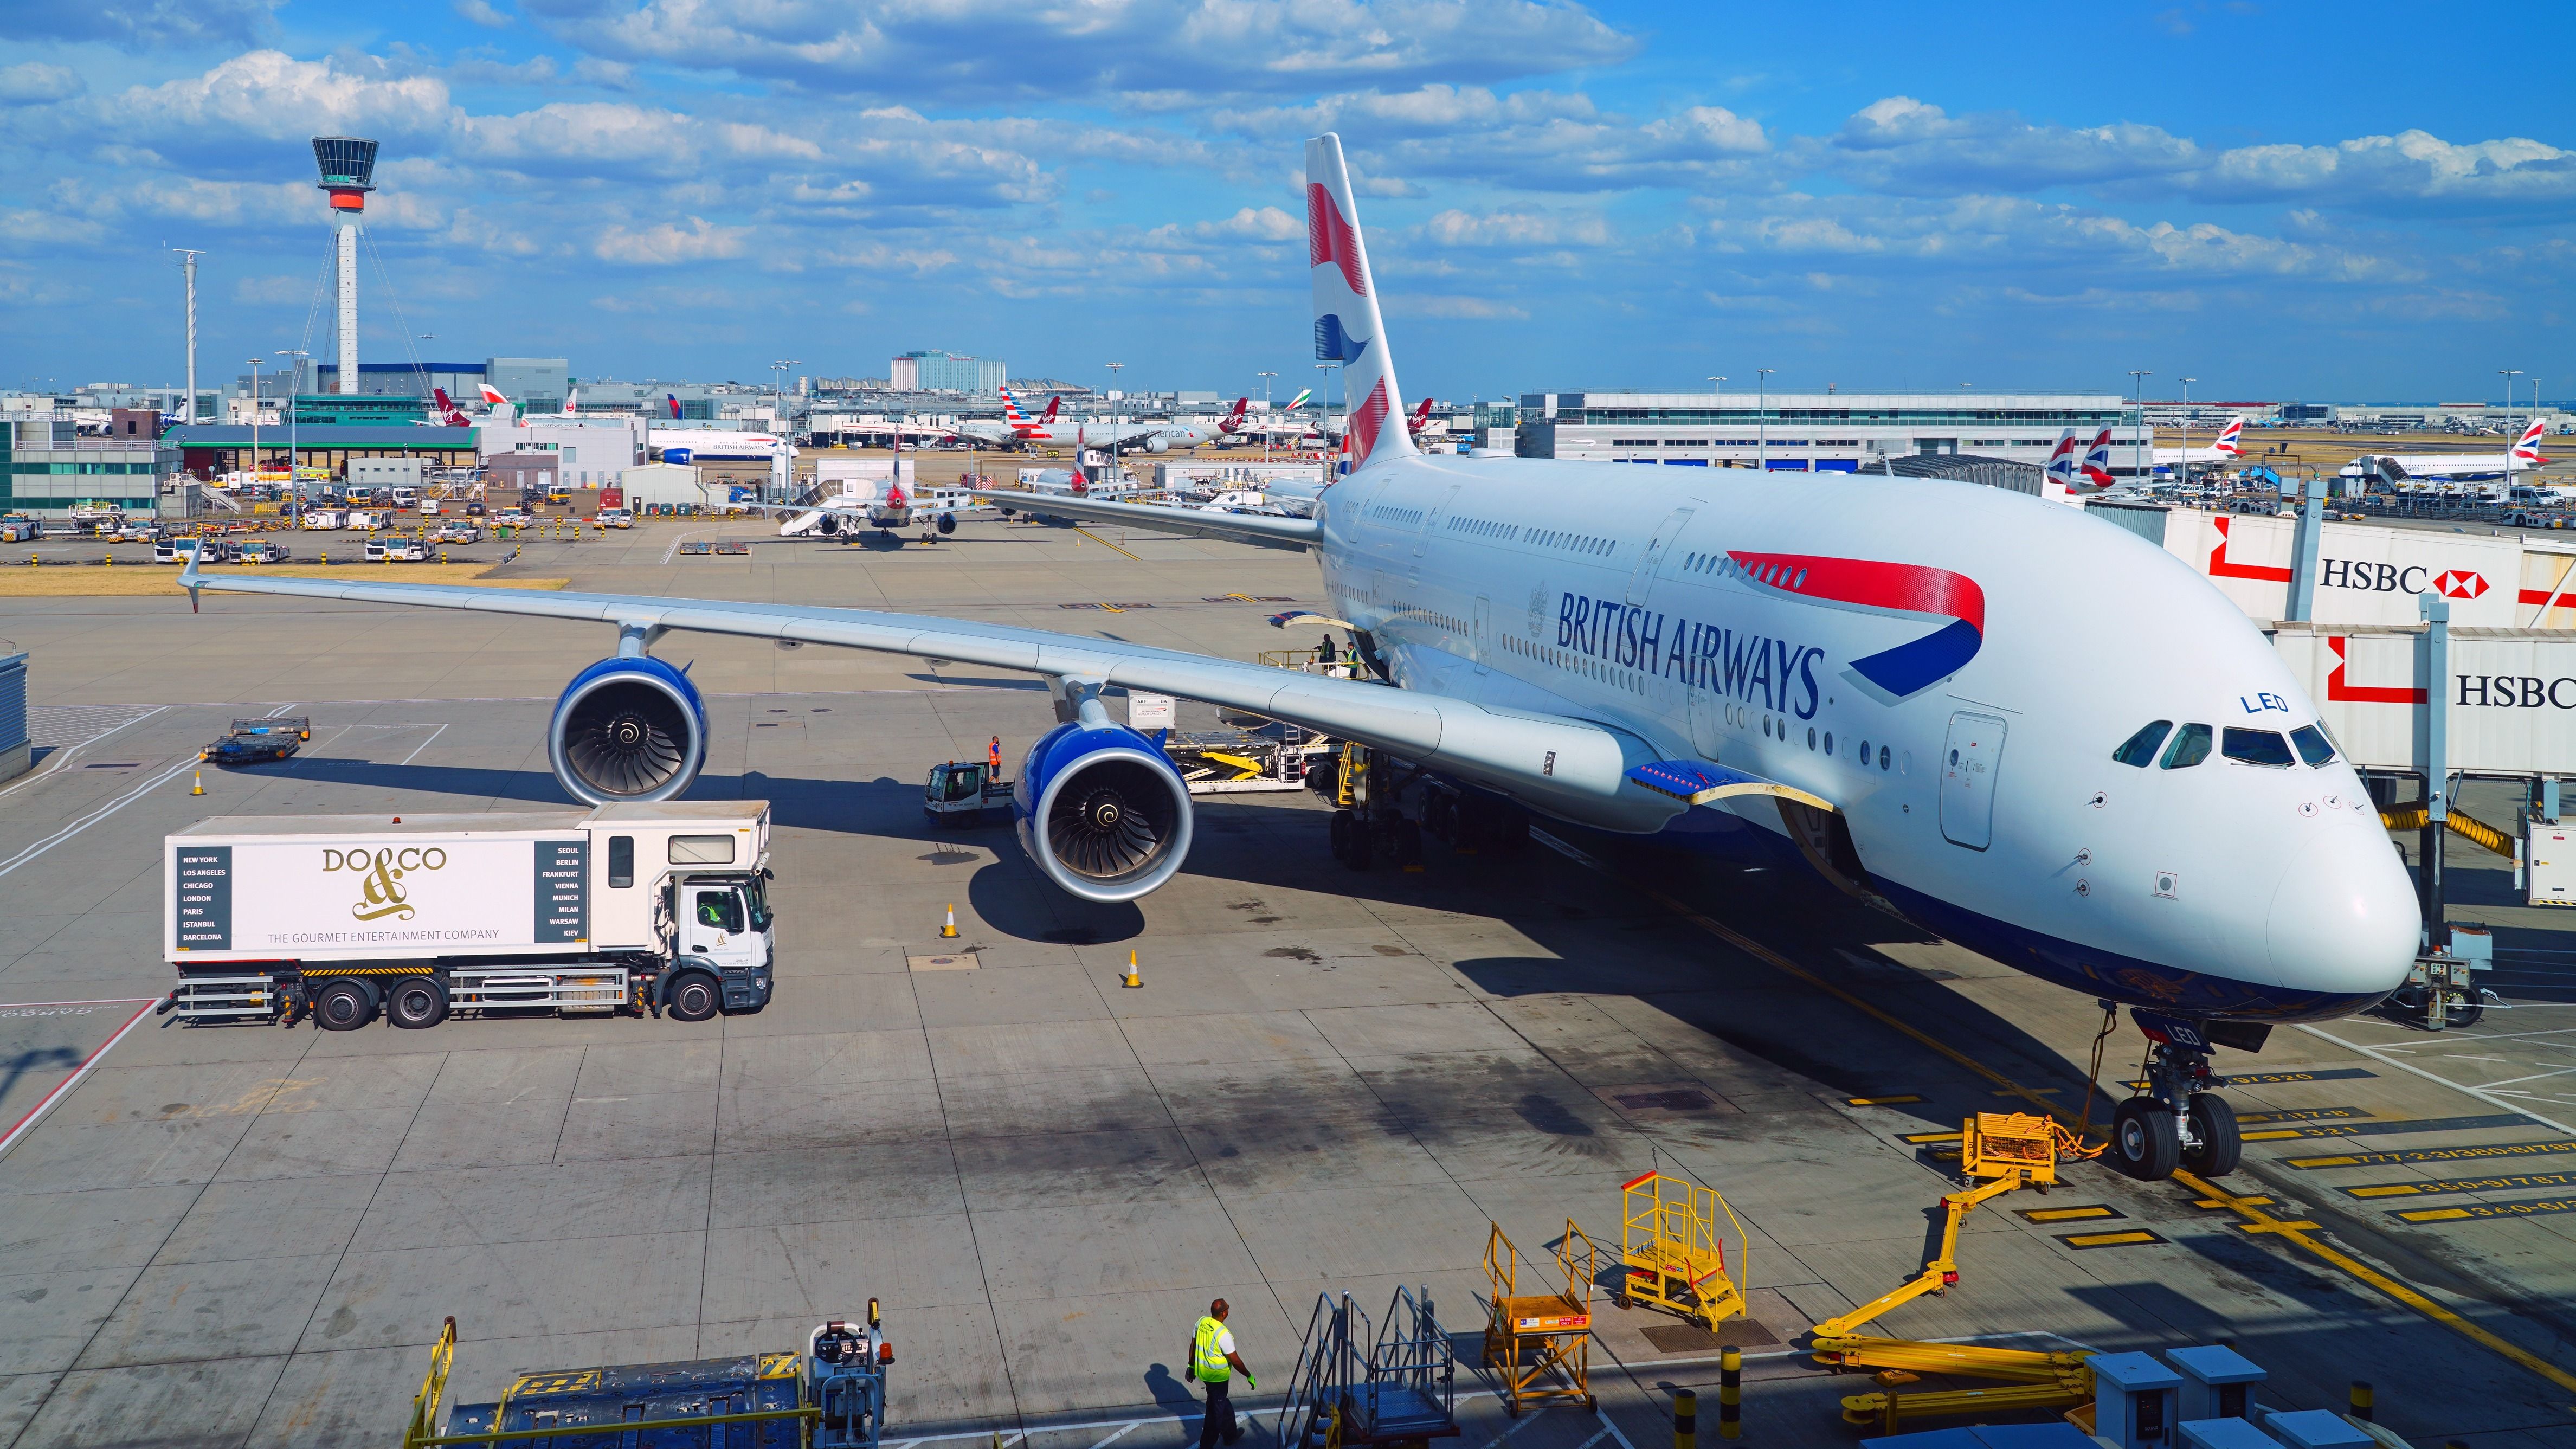 A British Airways Airbus A380 parked on stand at London Heathrow Airport.